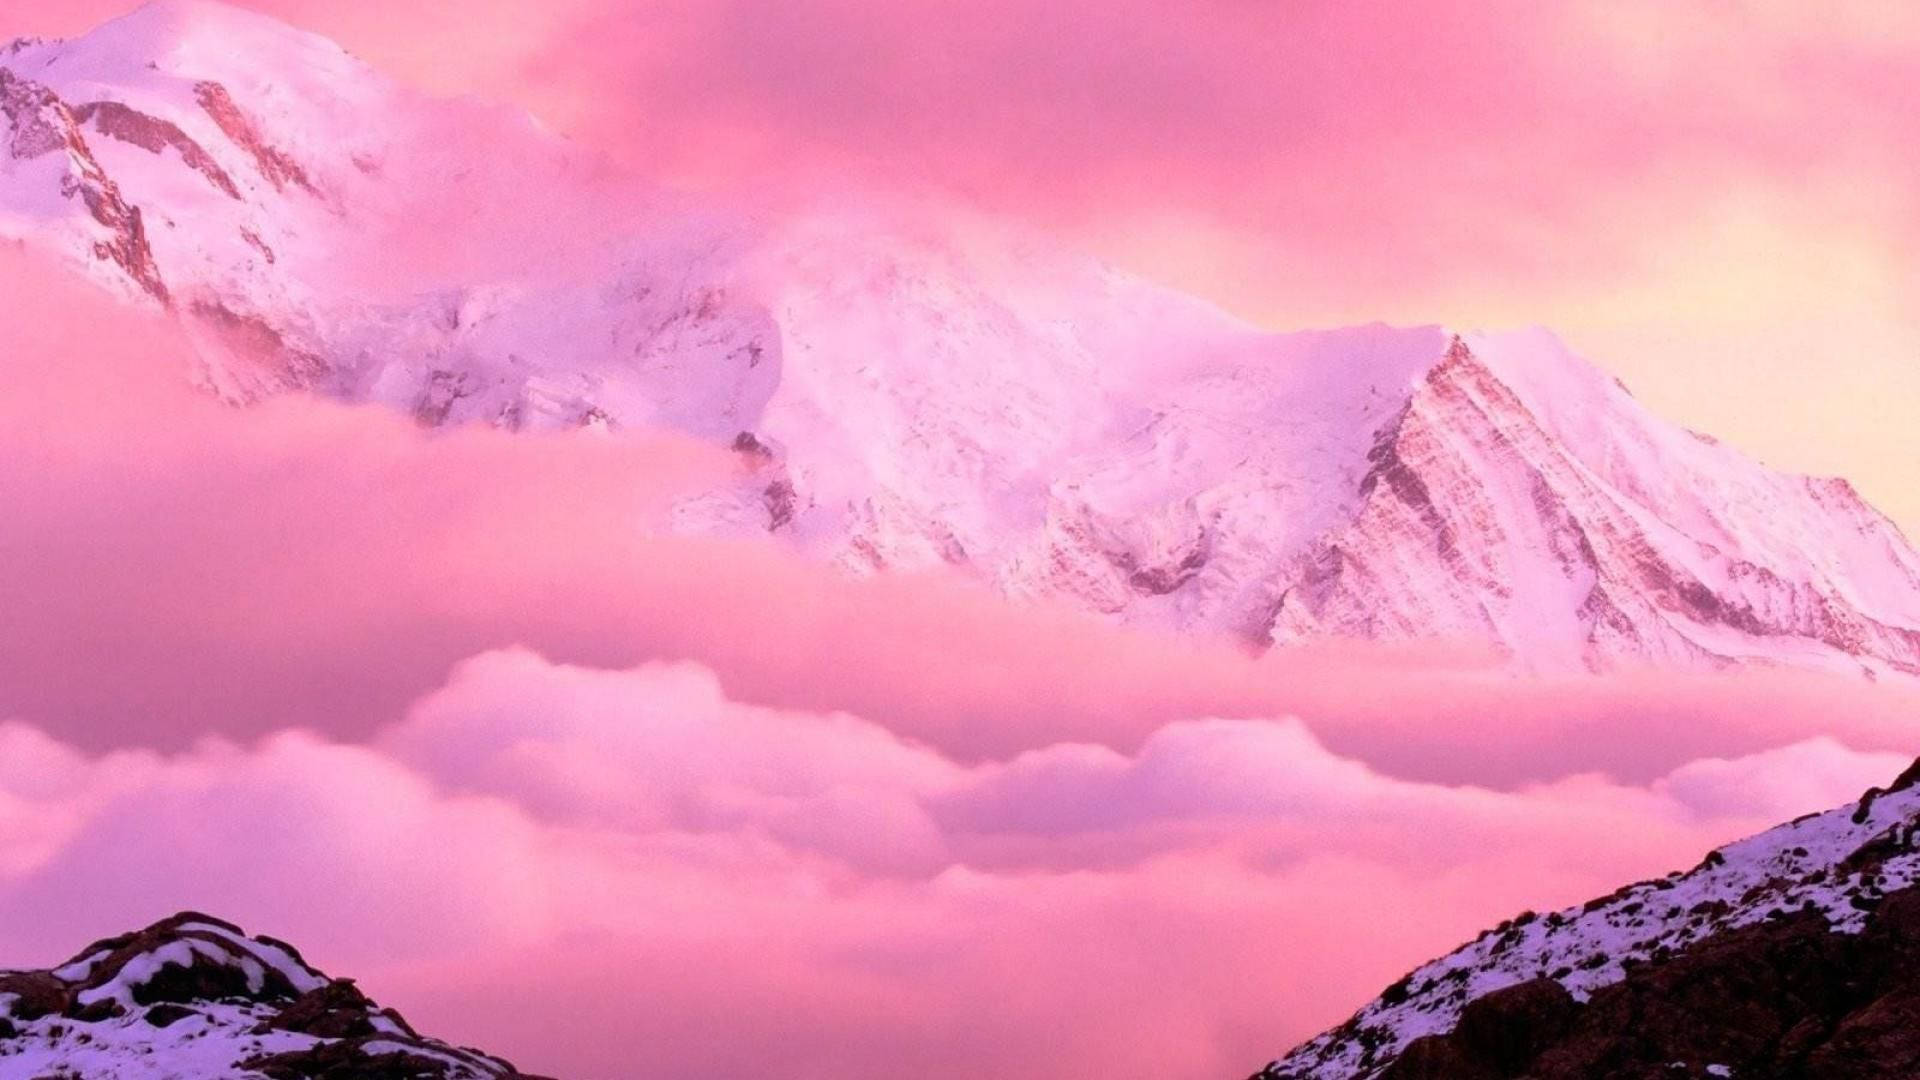 Aesthetic Pink Mountain Background